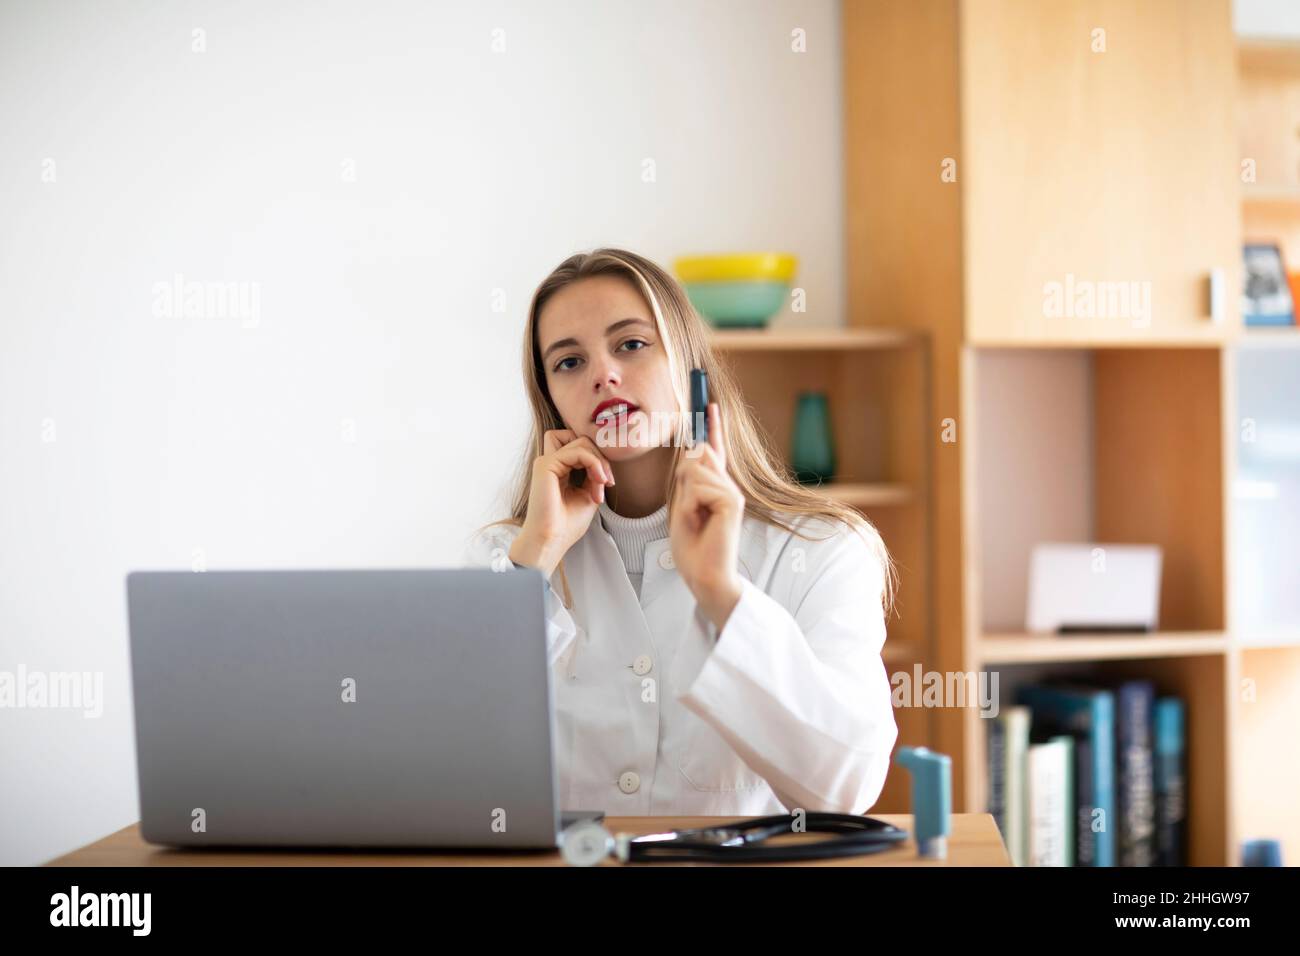 Portrait of young female doctor with laptop Stock Photo